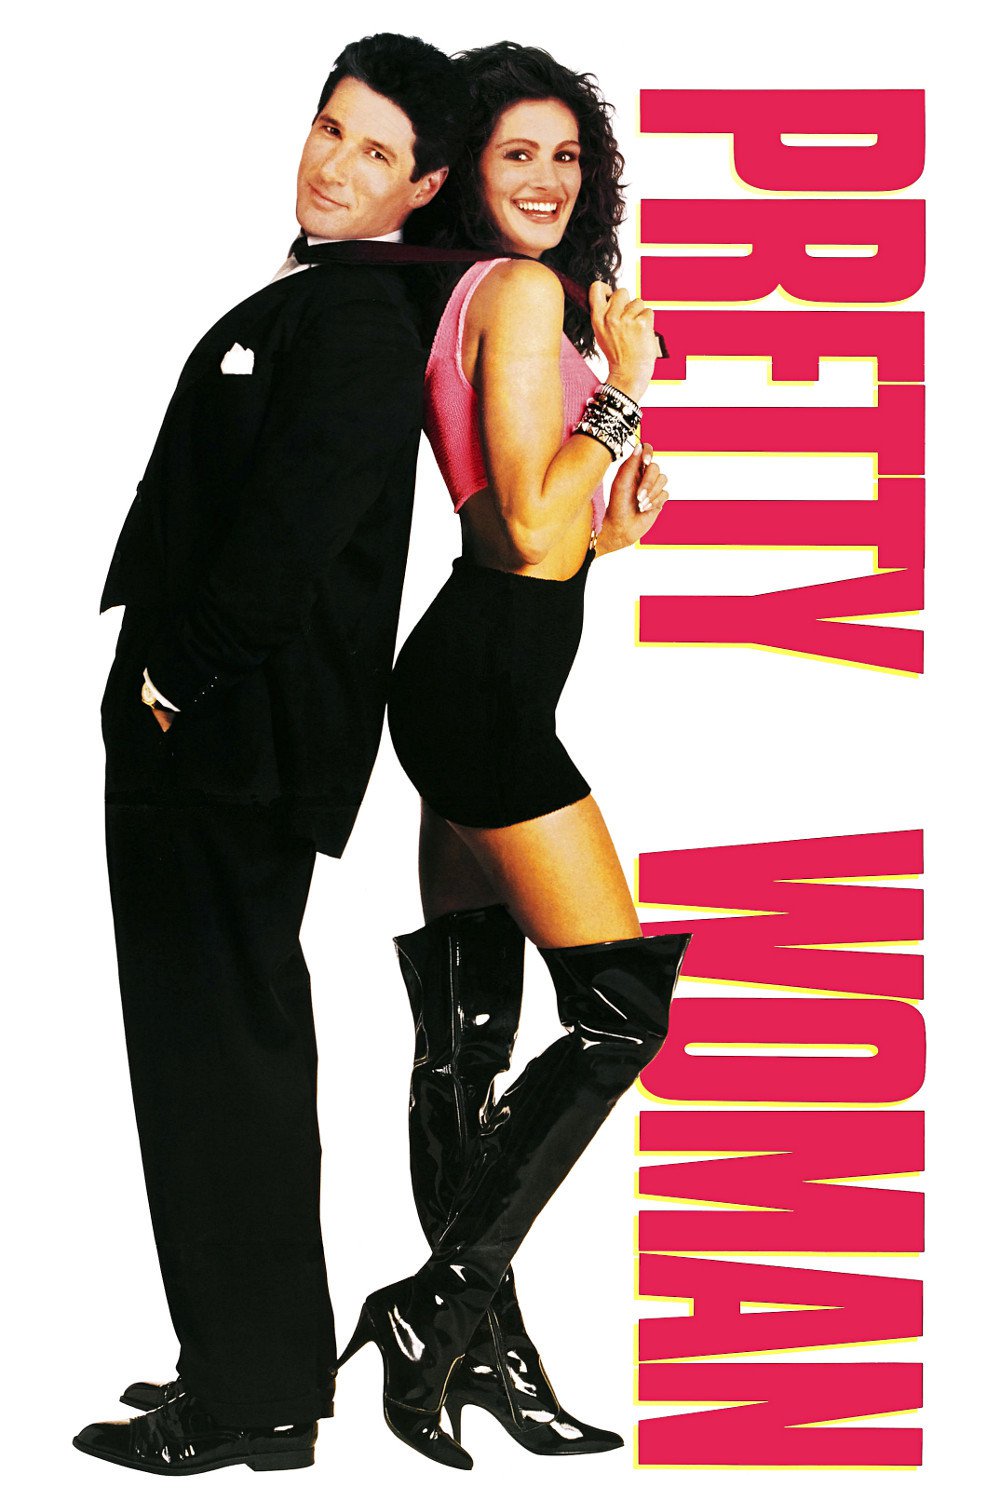 Poster for the movie "Pretty Woman"